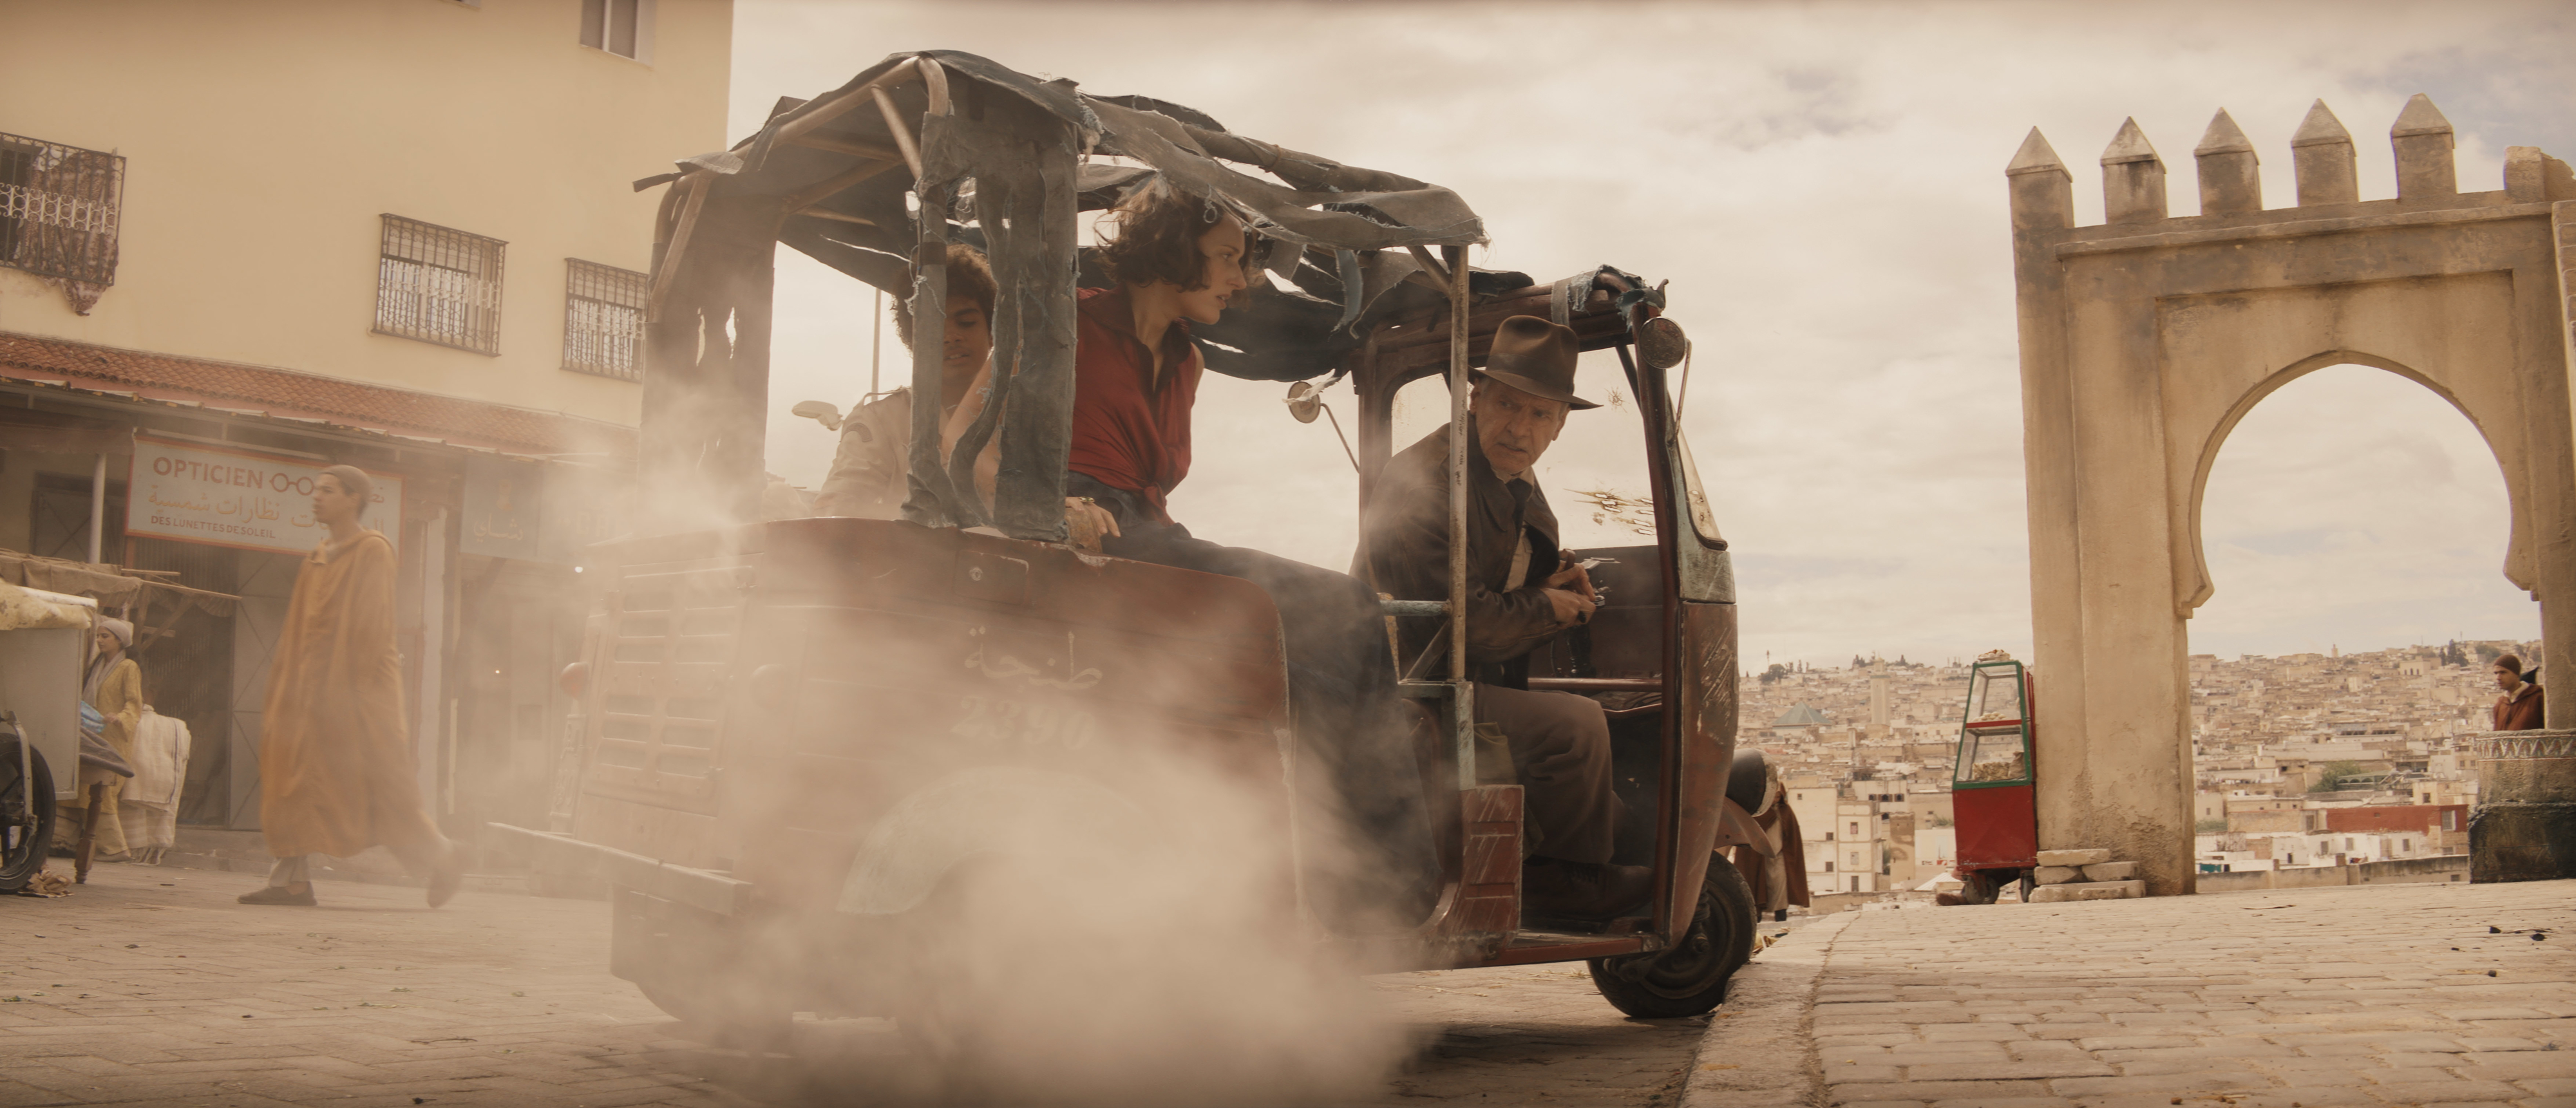 Helena and Indy in the new movie on a small vehicle